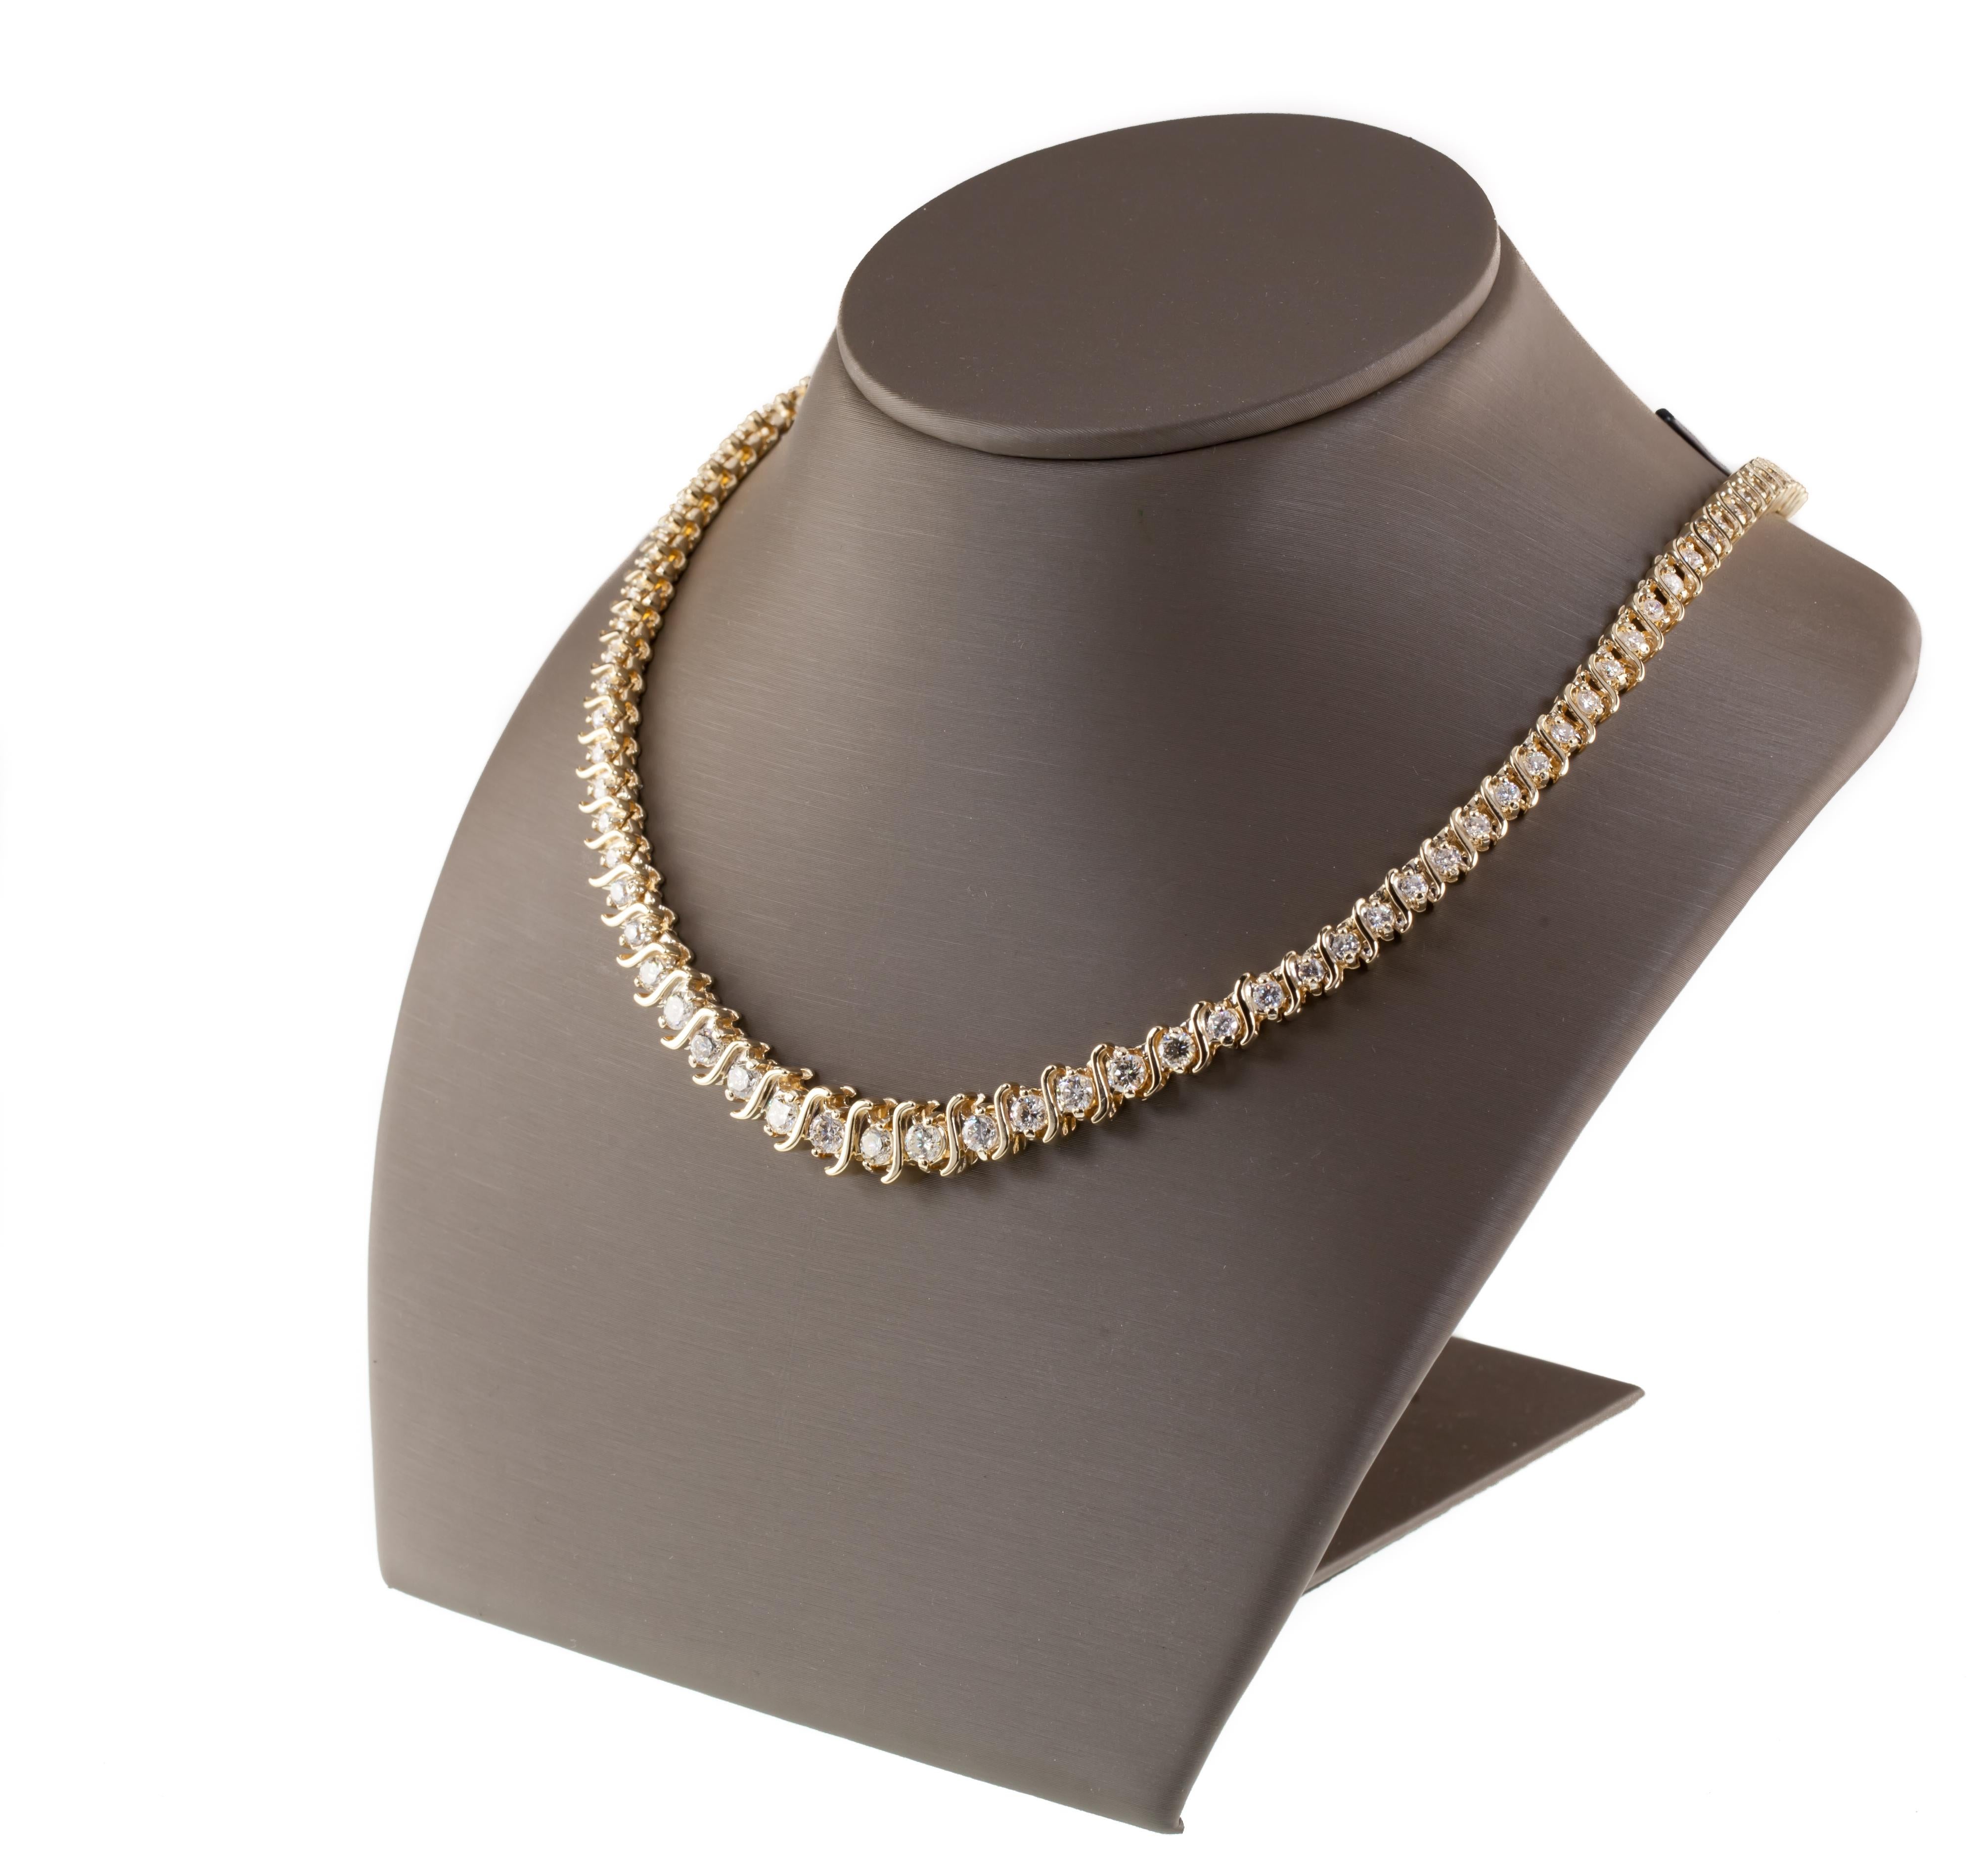 Gorgeous Tennis Necklace
Features Two-Prong Set Graduated Round Diamonds Separated by Yellow Gold 